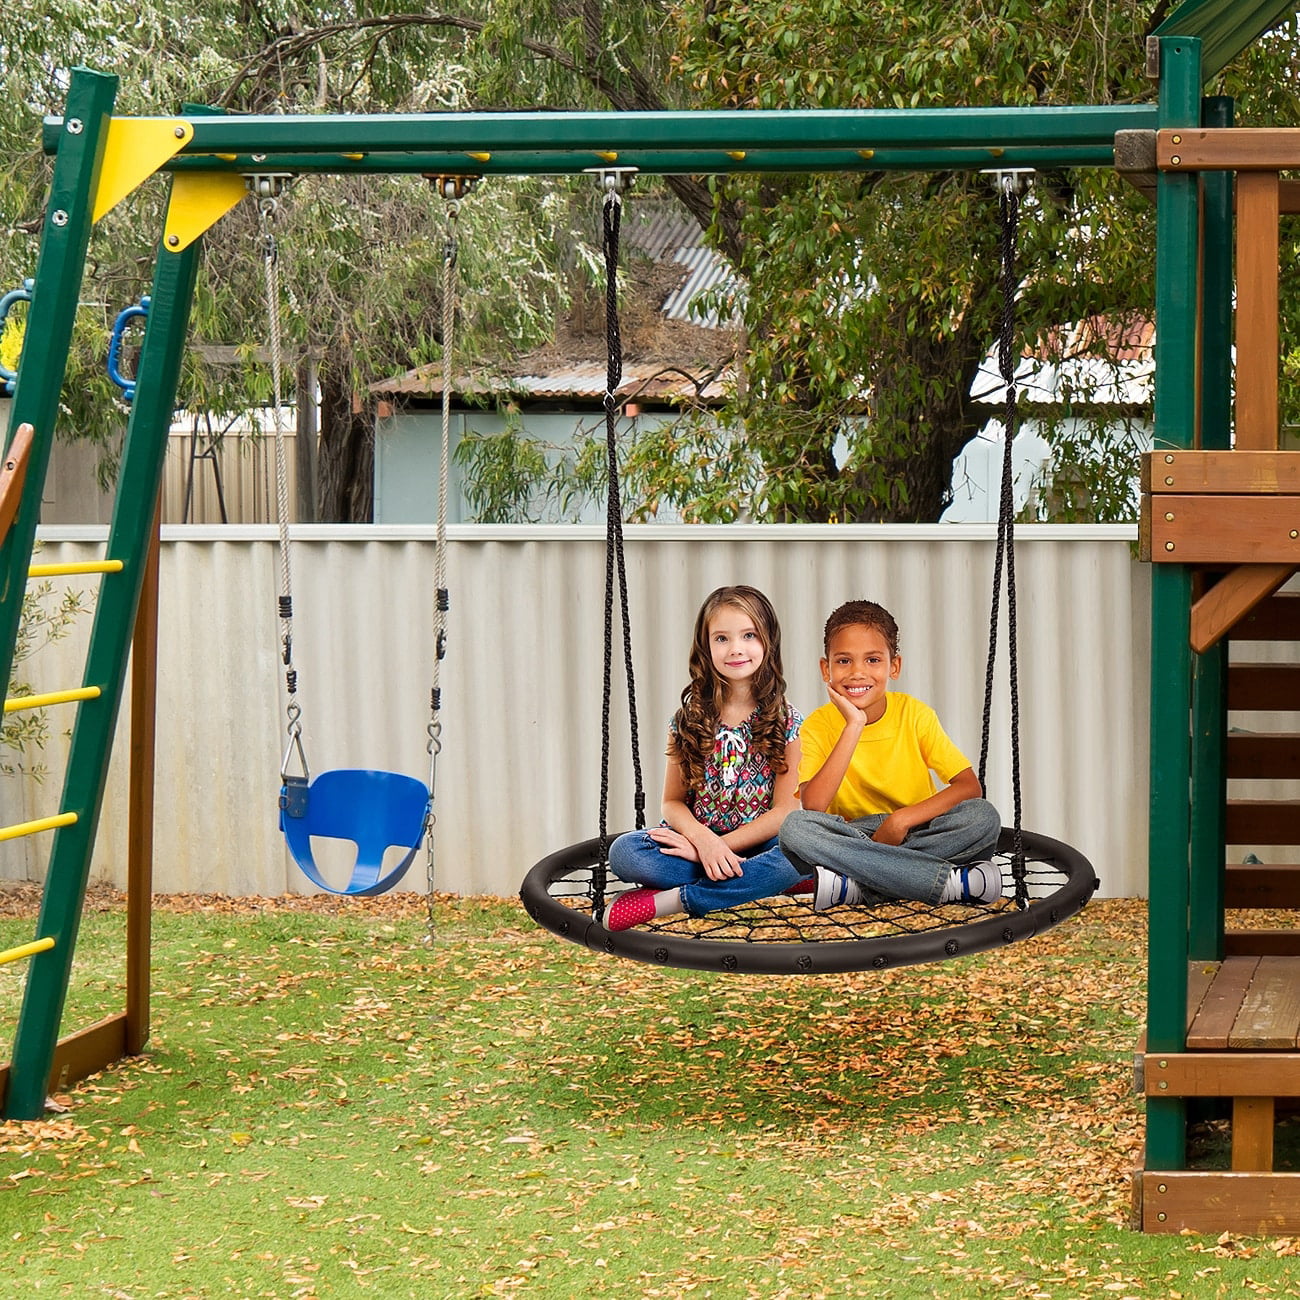 Spinner Swing Kids Round Web Swing Great for Tree, Backyard, Playground,  Playroom Accessories Included (40 Net Seat) 